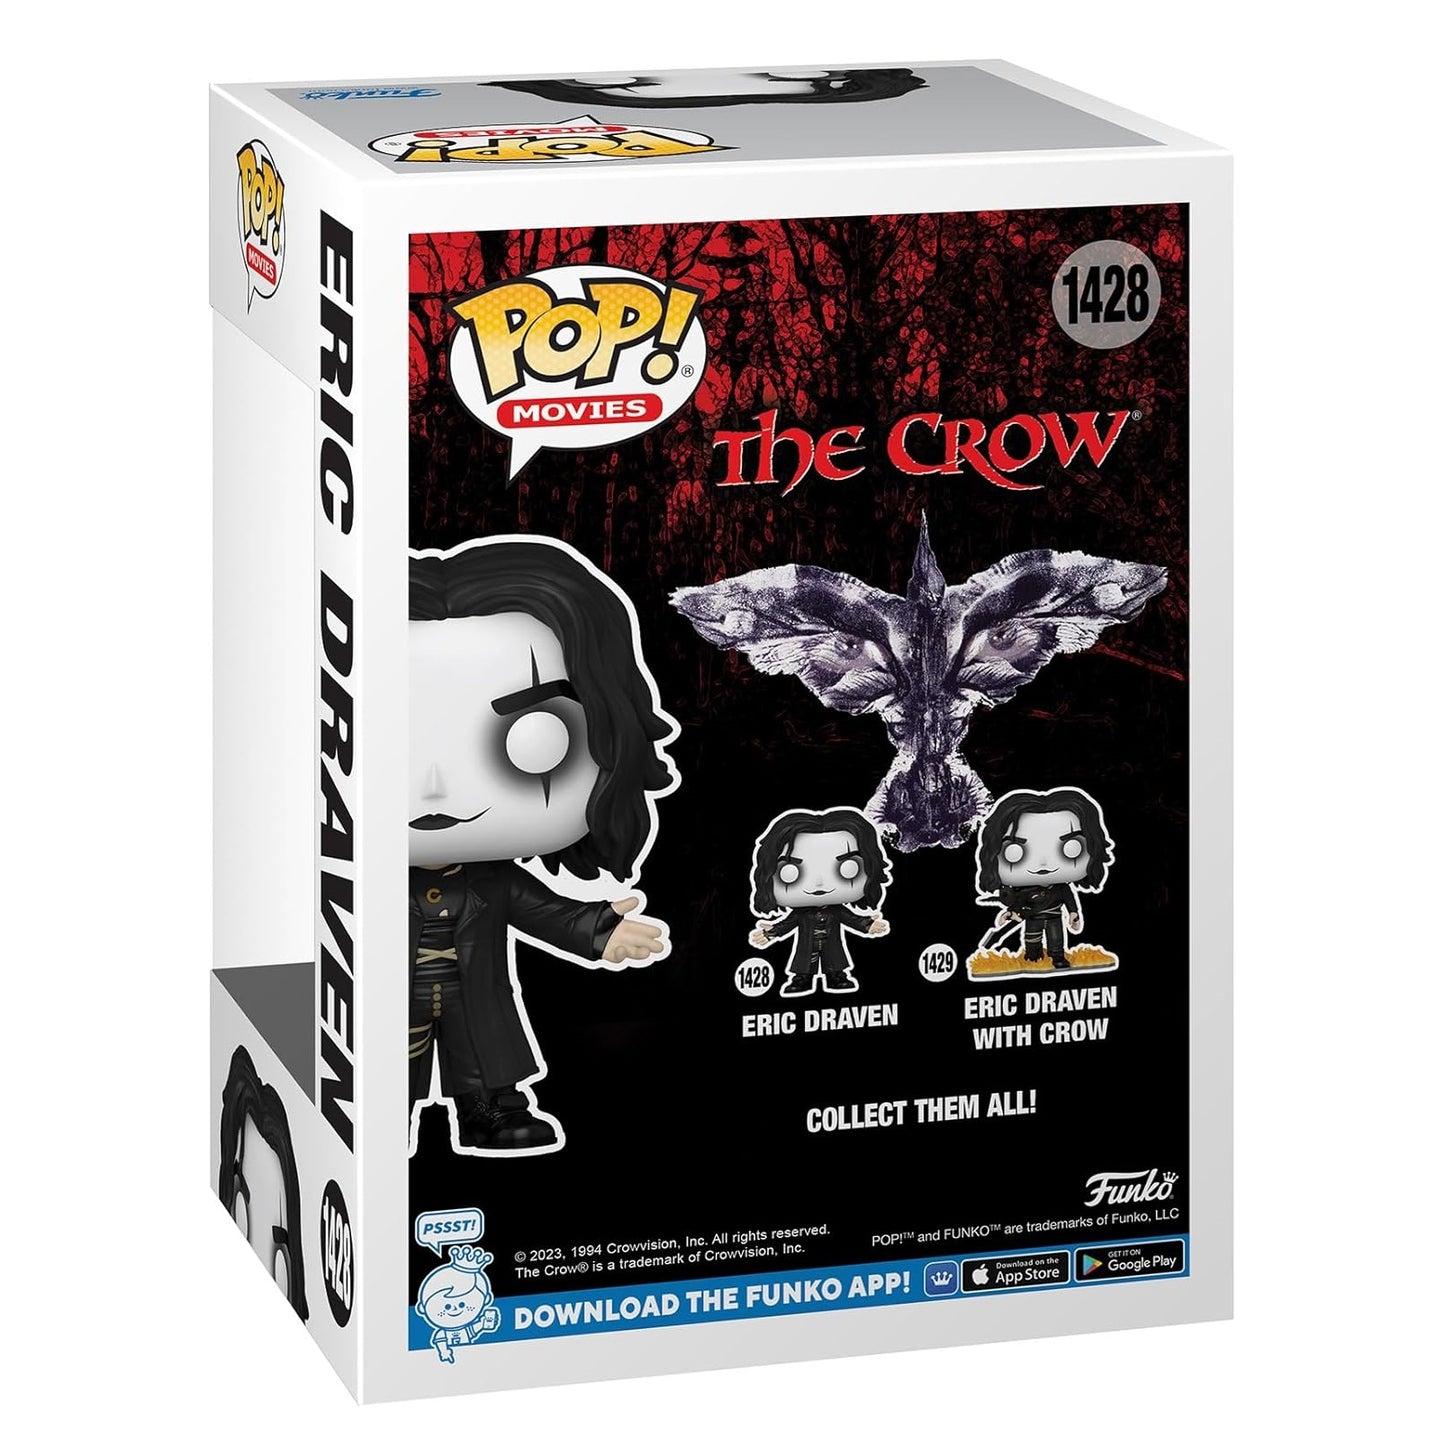 Eric Draven from The Crow vinyl figure